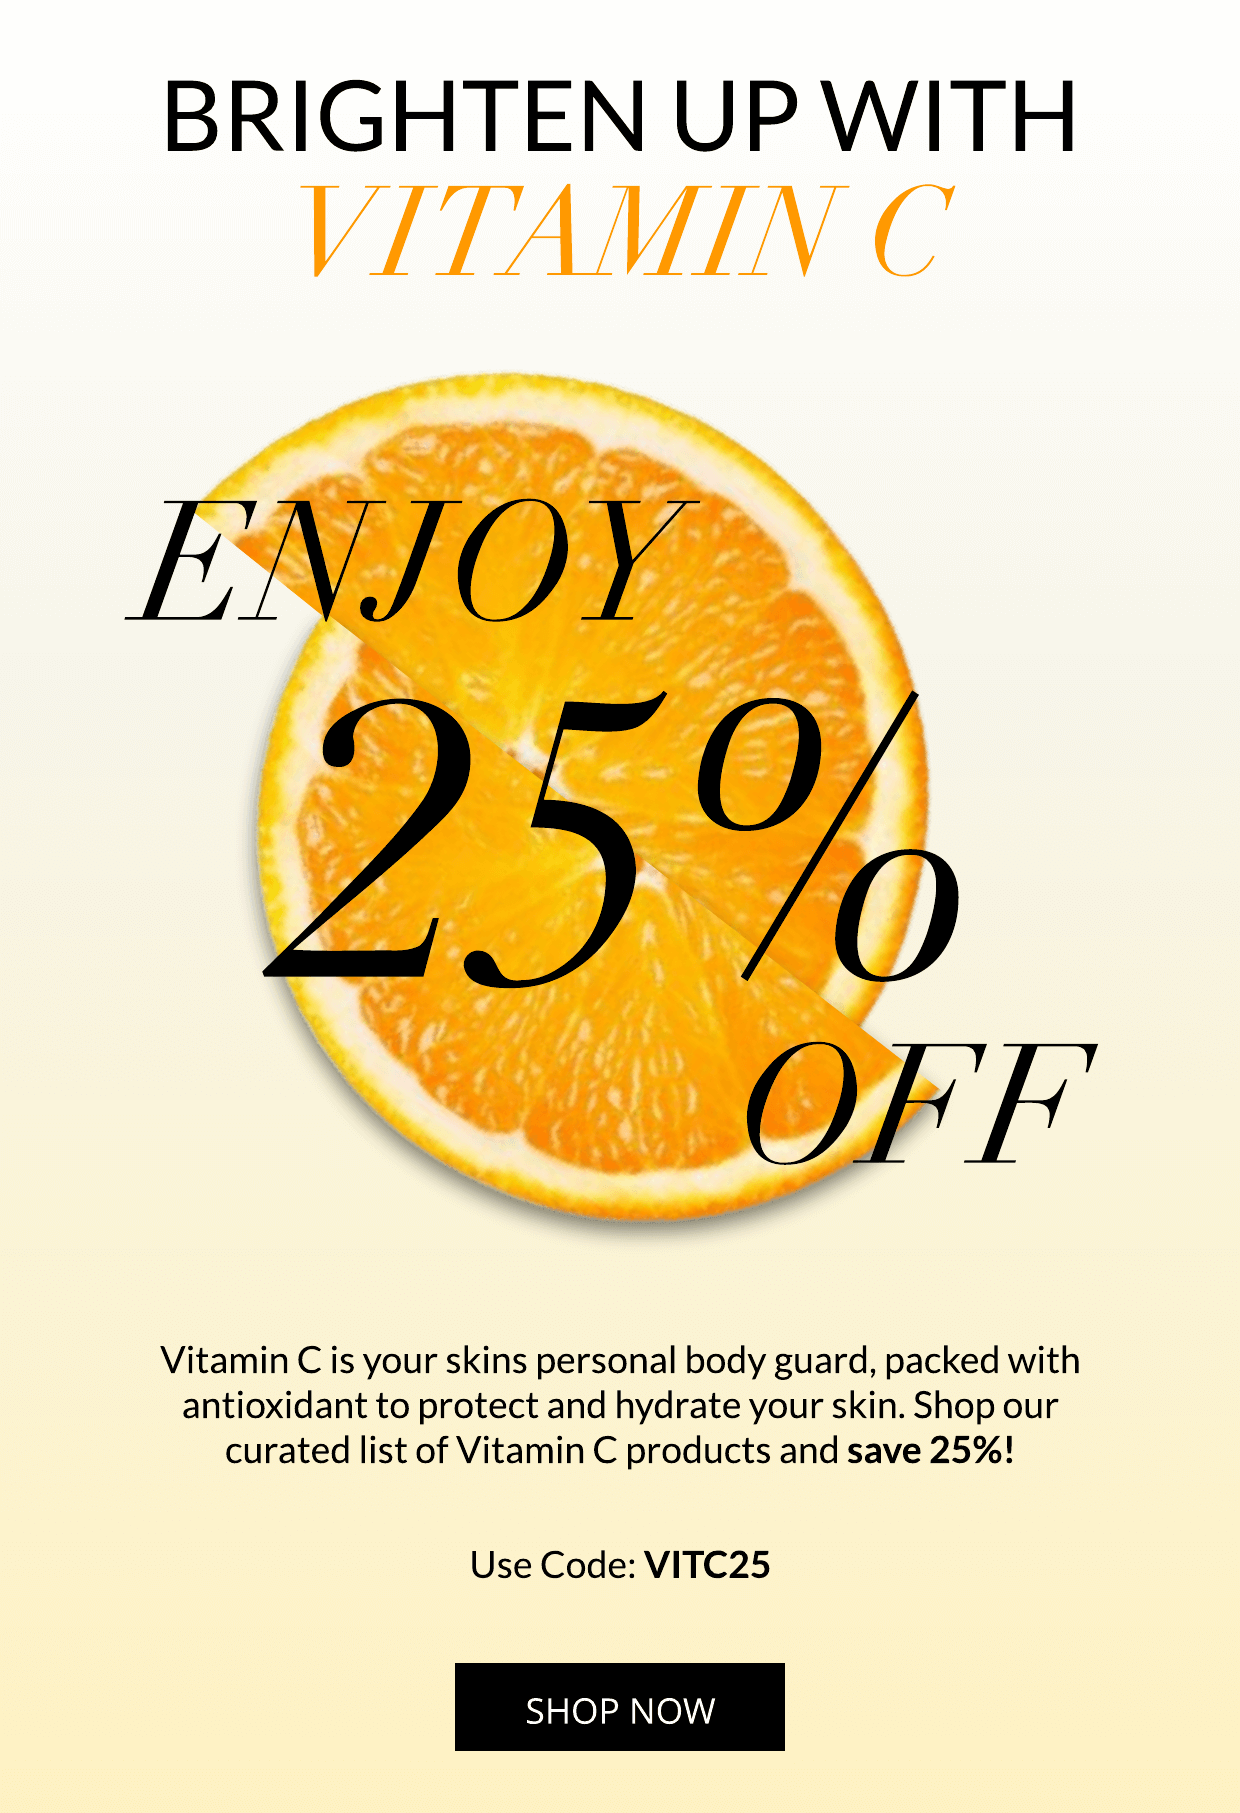 Save 25% on Vitamin C products